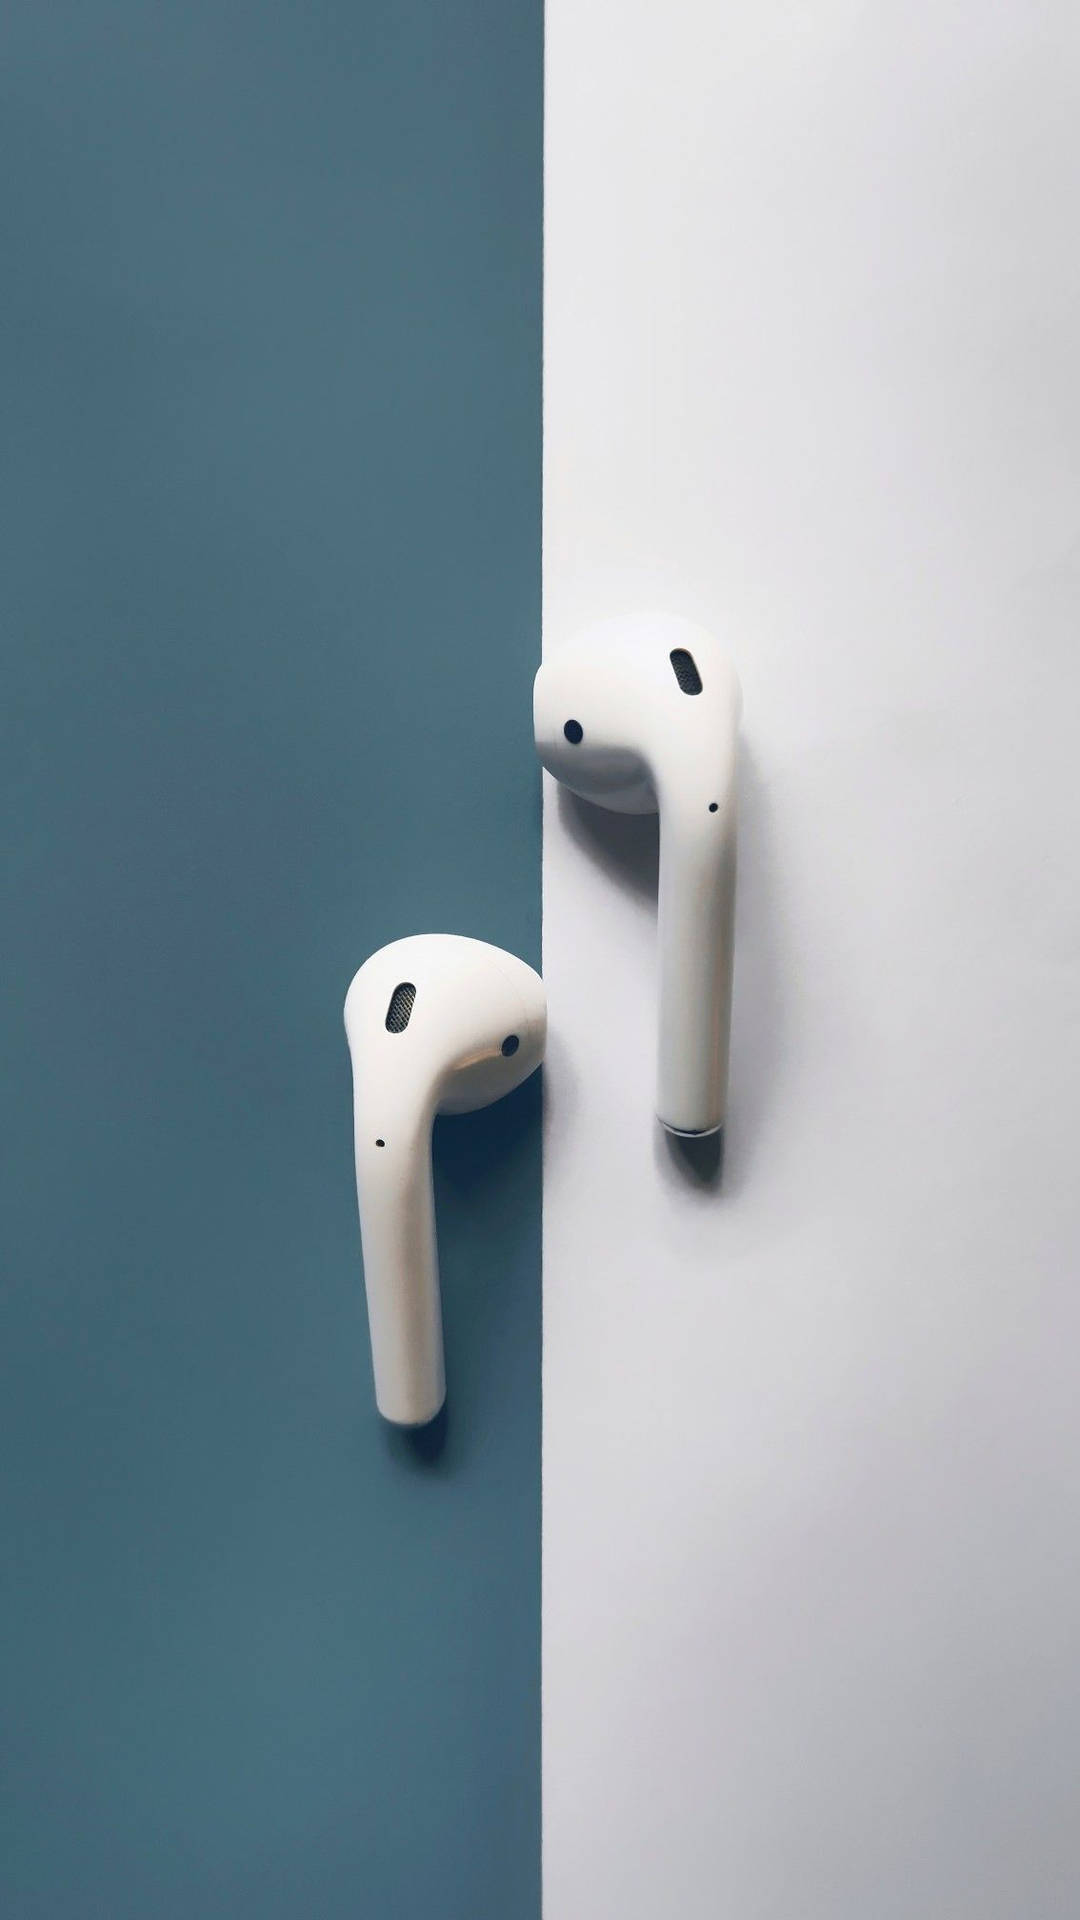 Bluetooth White AirPods Wallpaper